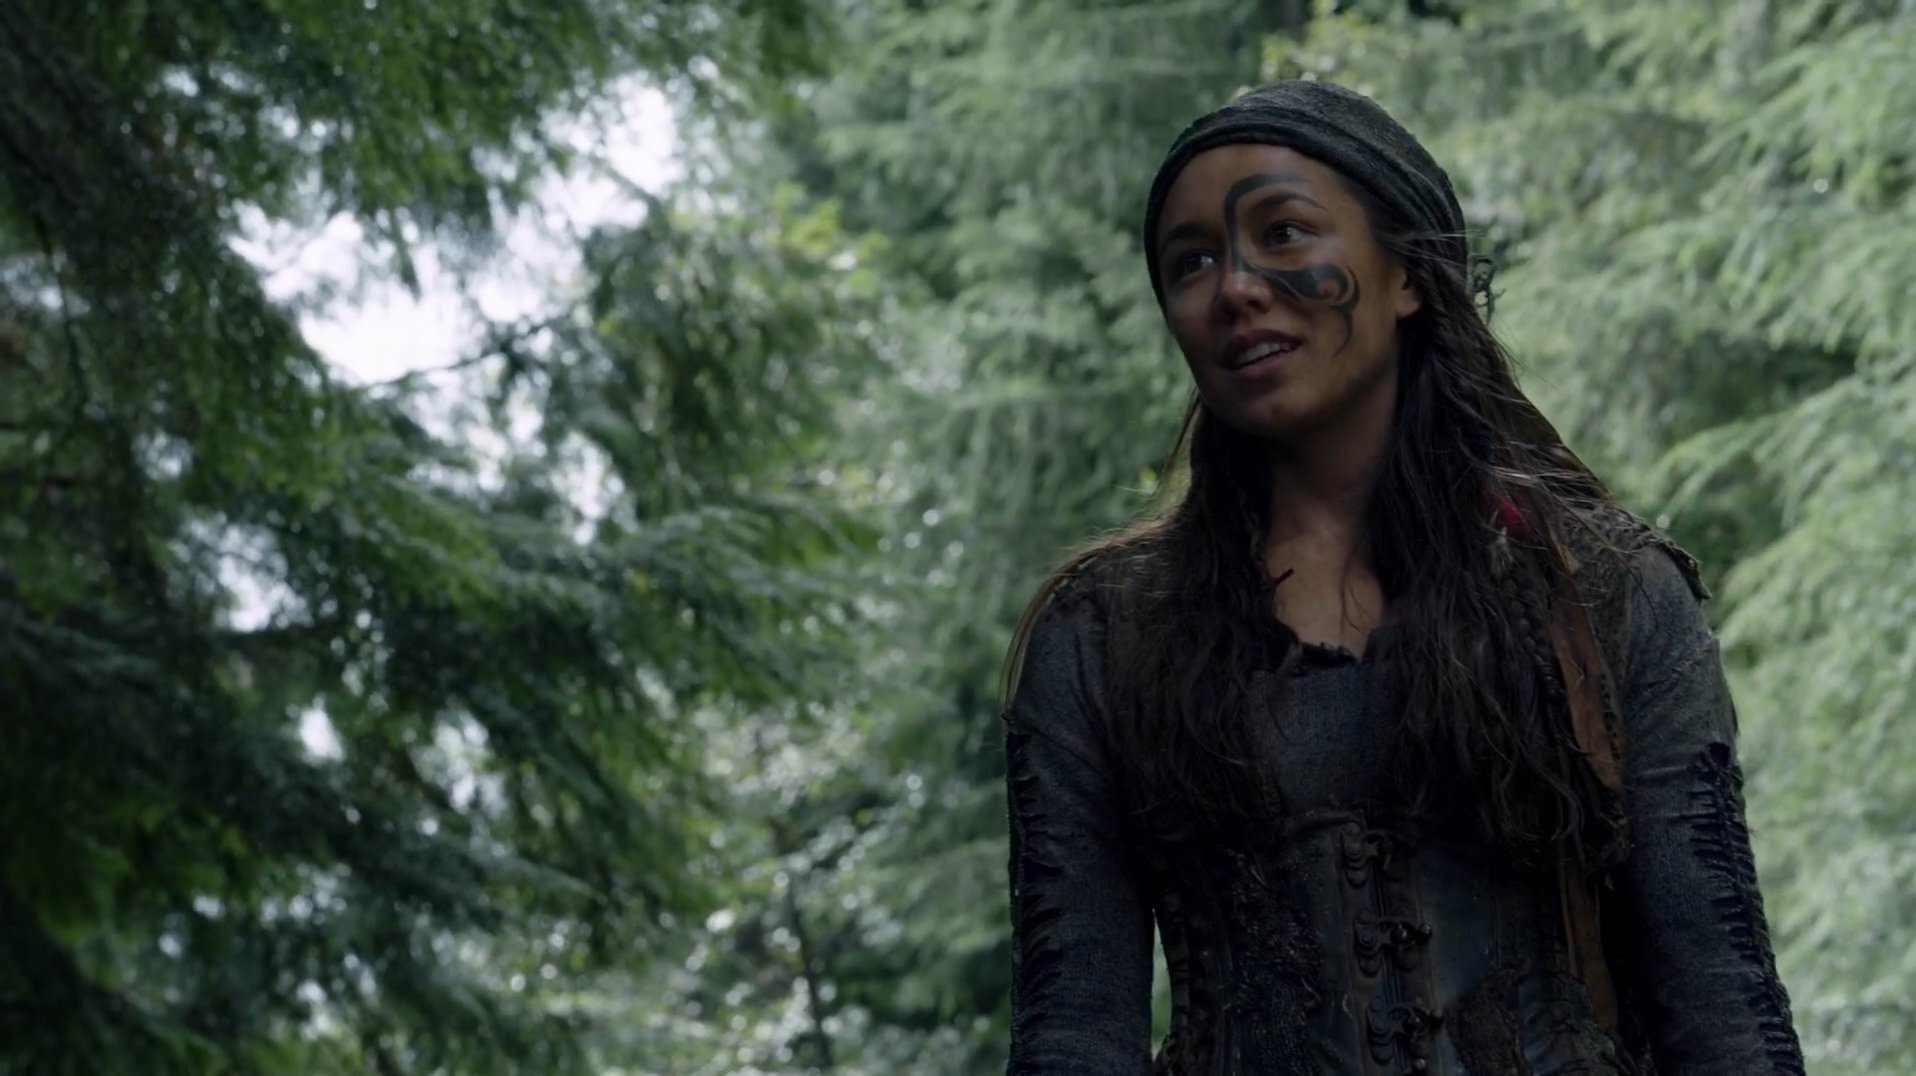 Emori from "The 100" poses outside, while working with members of the 100. 